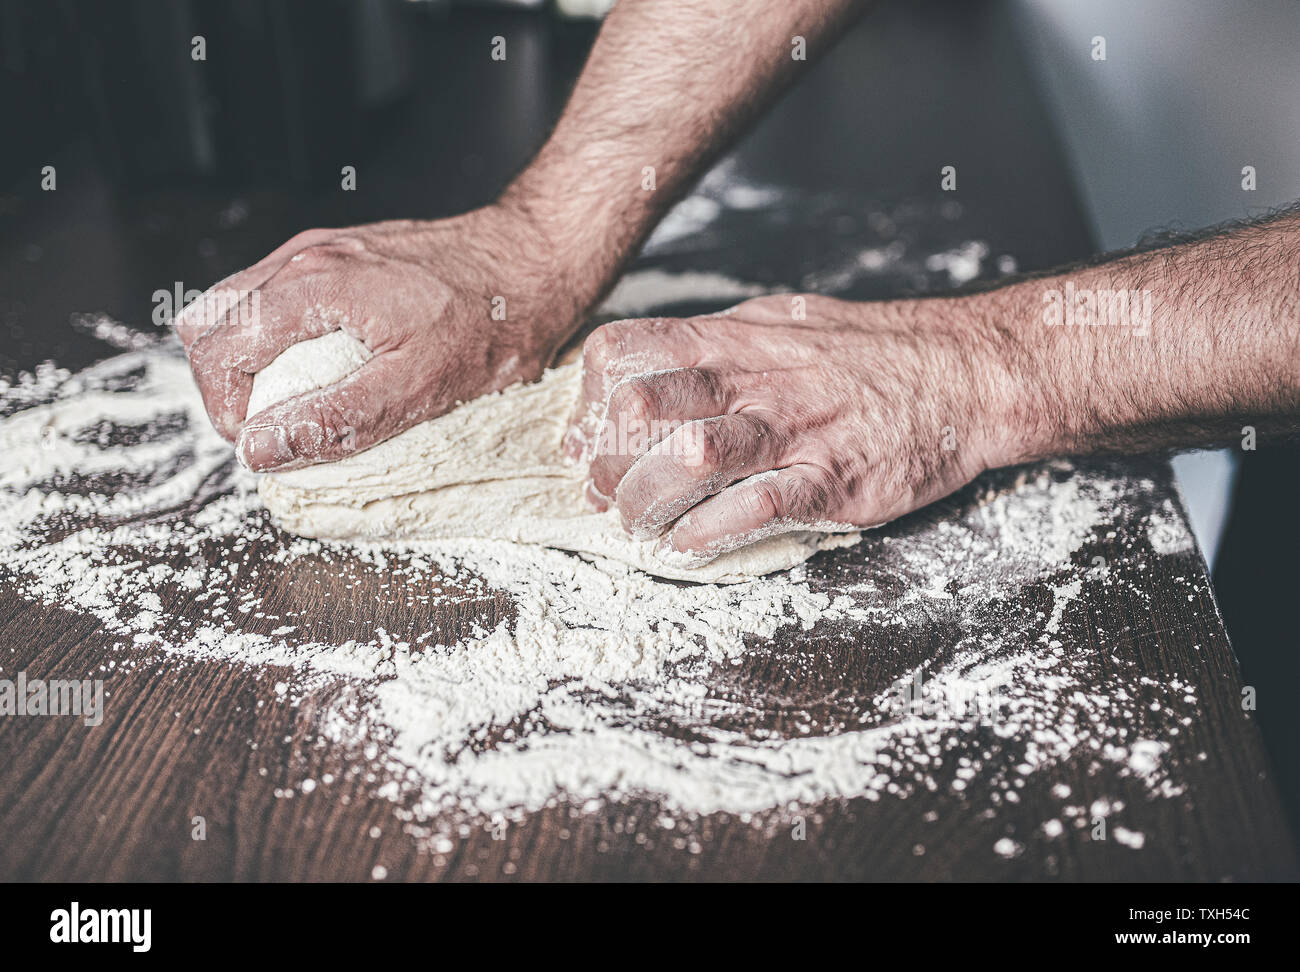 close-up of hands of man kneading yeast dough on floured kitchen counter Stock Photo